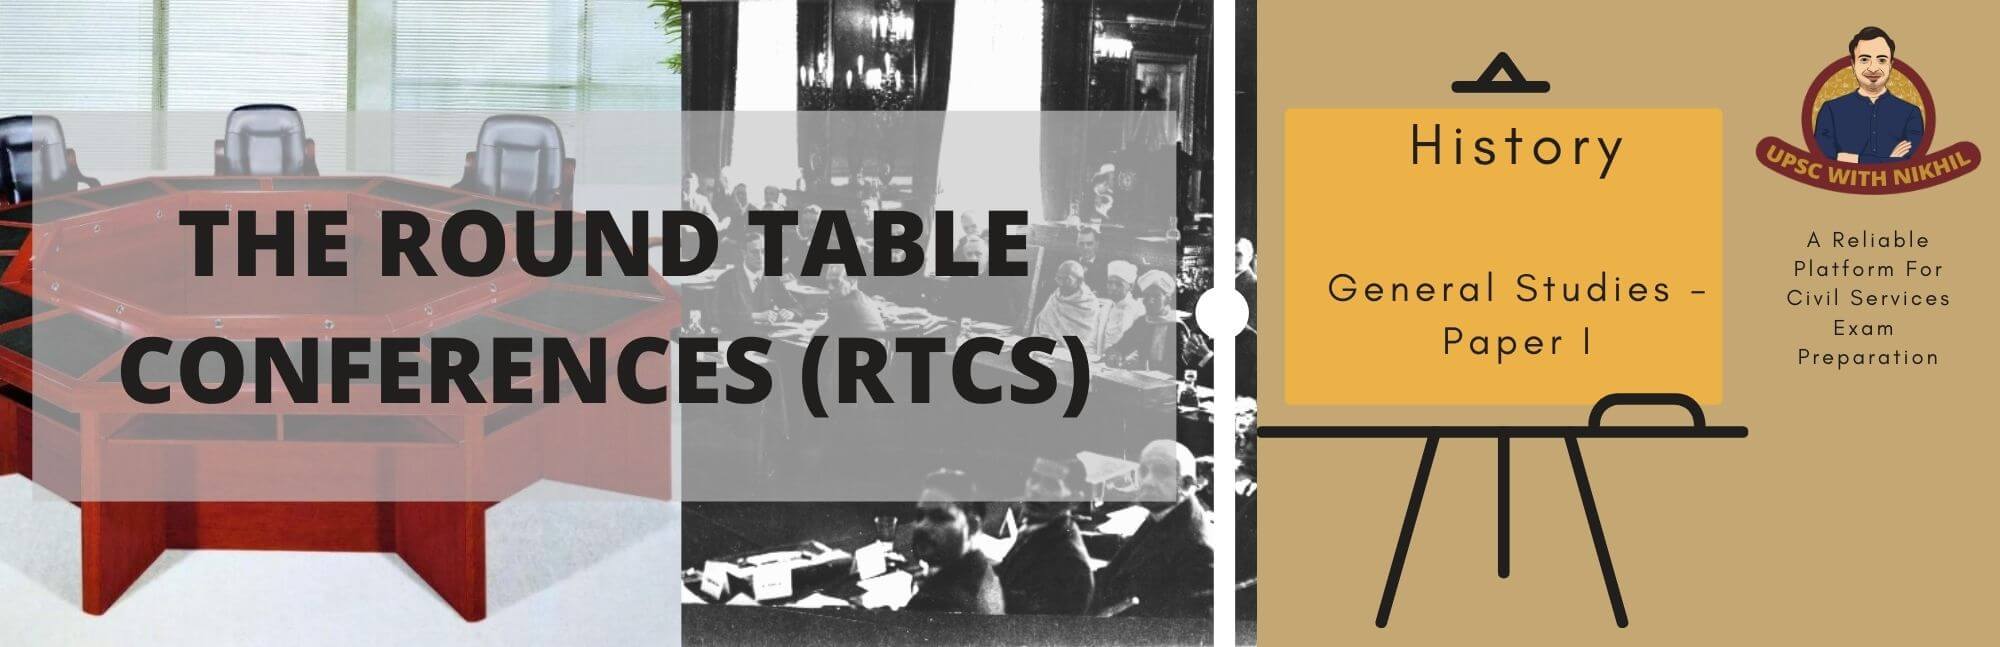 The Round Table Conferences Rtcs, Why Was The First Round Table Conference Held